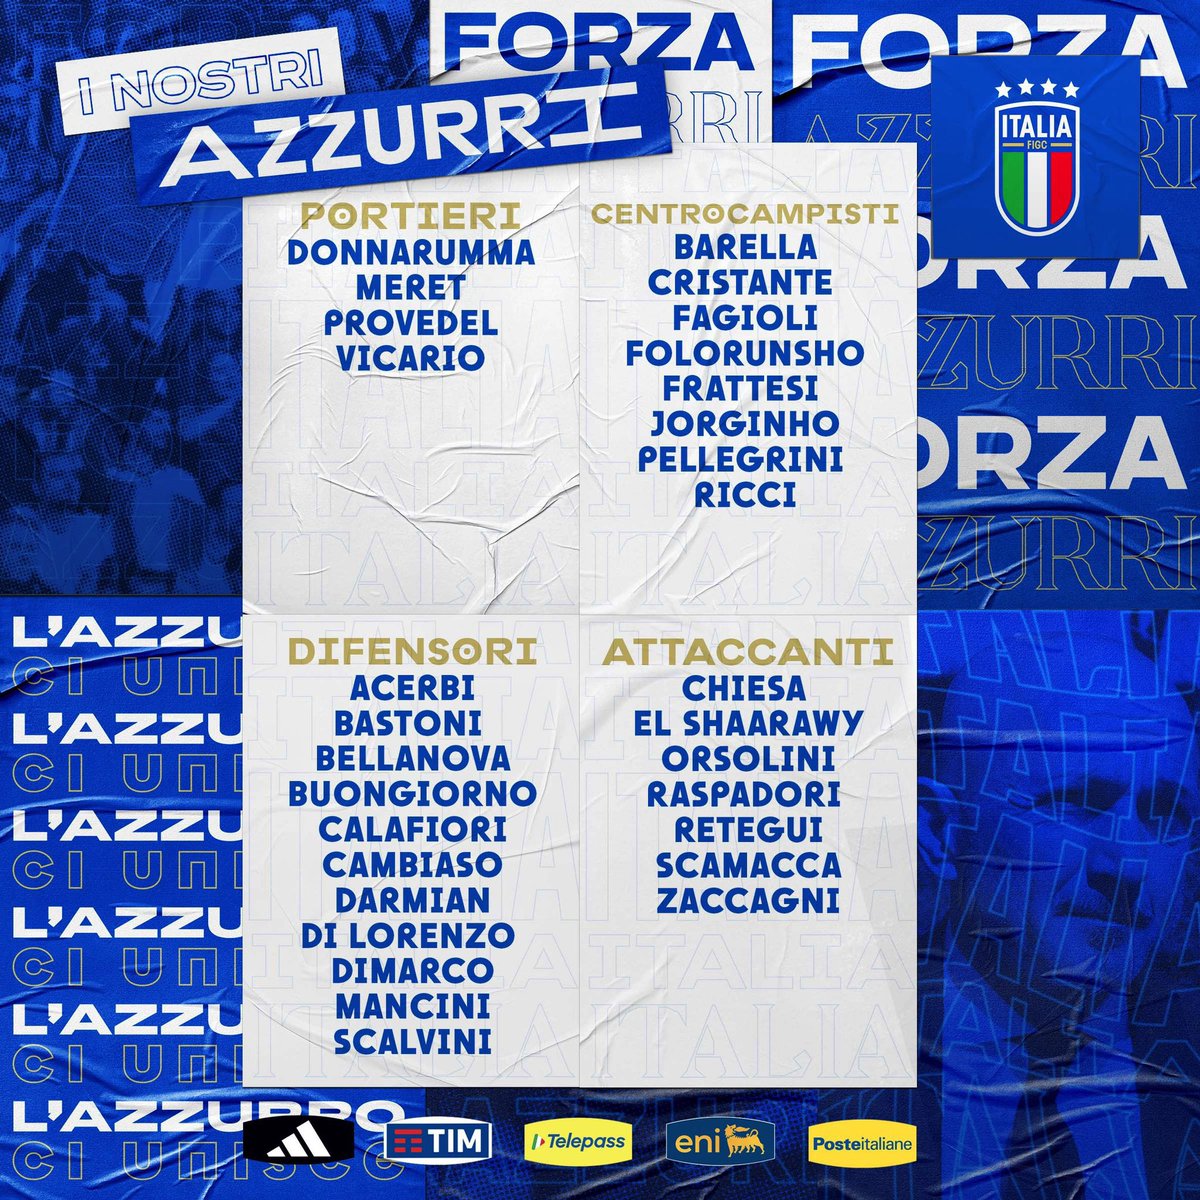 🚨🇮🇹 OFFICIAL: Italy provisional squad for Euro 2024. 4 players will be cut to make the final list. ❗️ Nicolò Fagioli, back with the team.